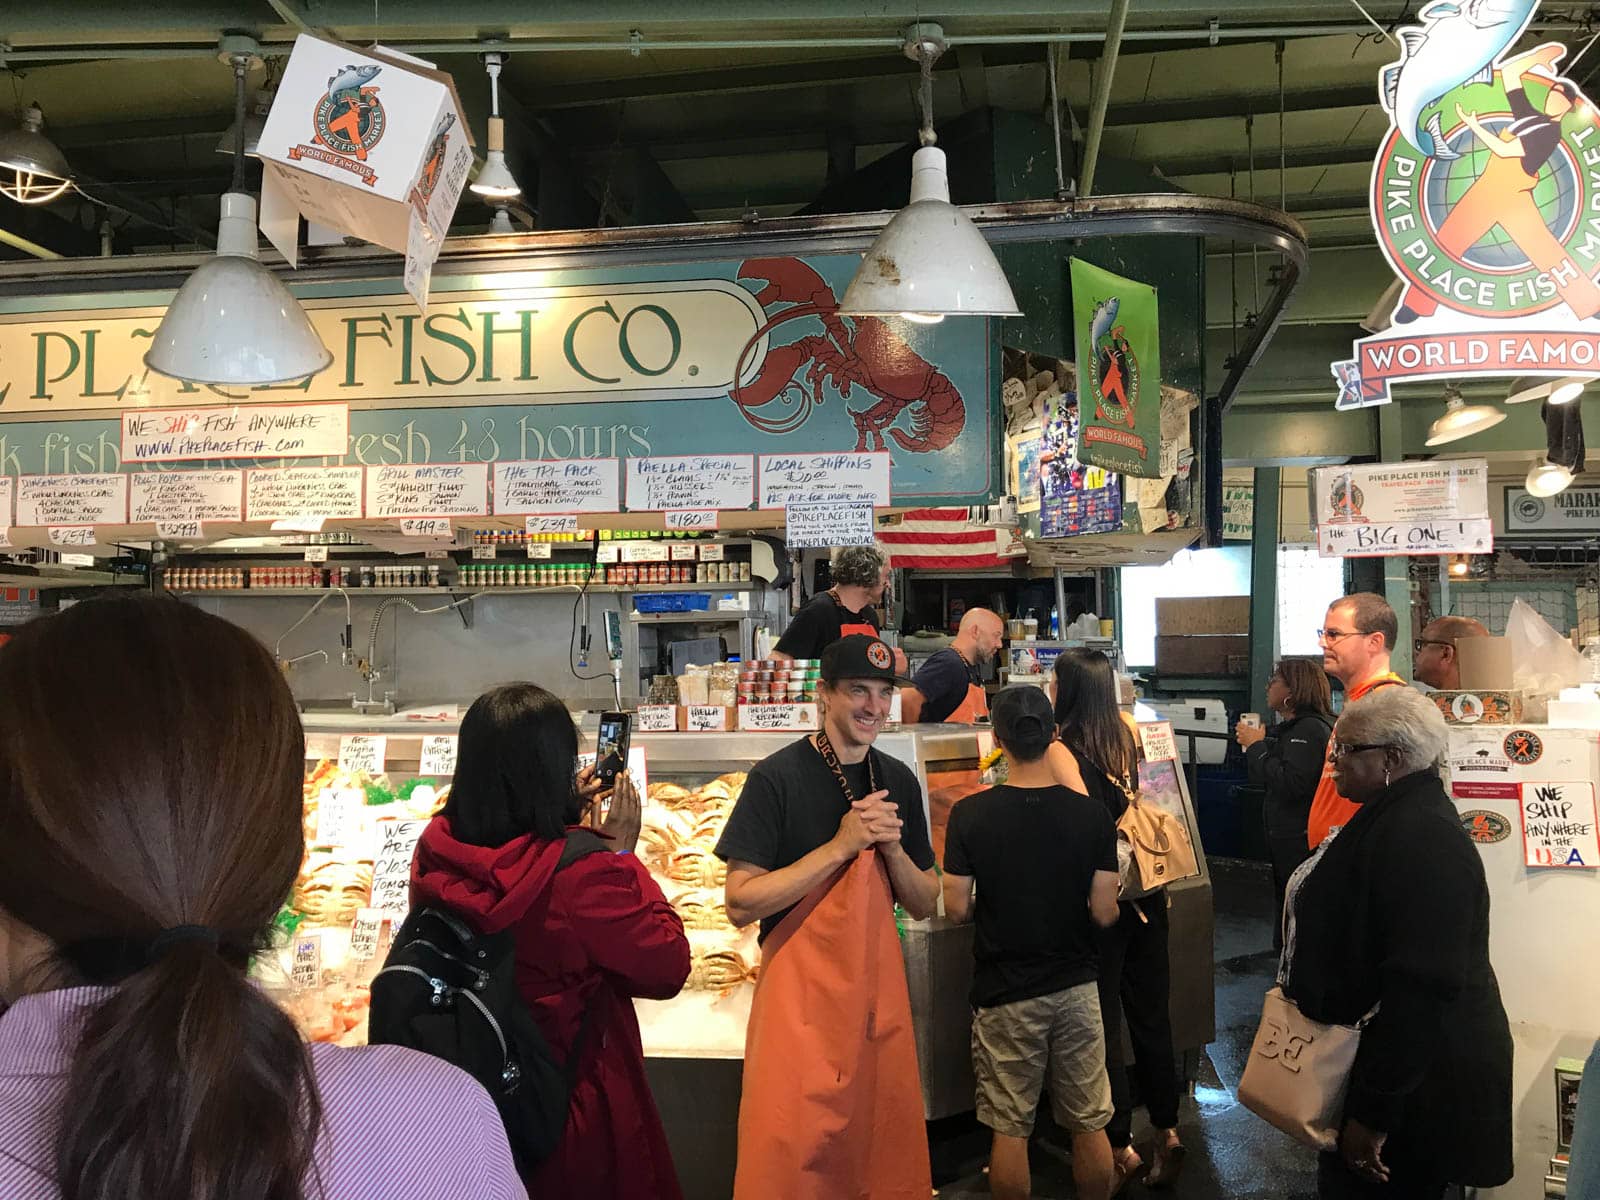 The front of a fish shop inside an indoor market. Some of the seafood can be seen. There are several people gathered around the shop.